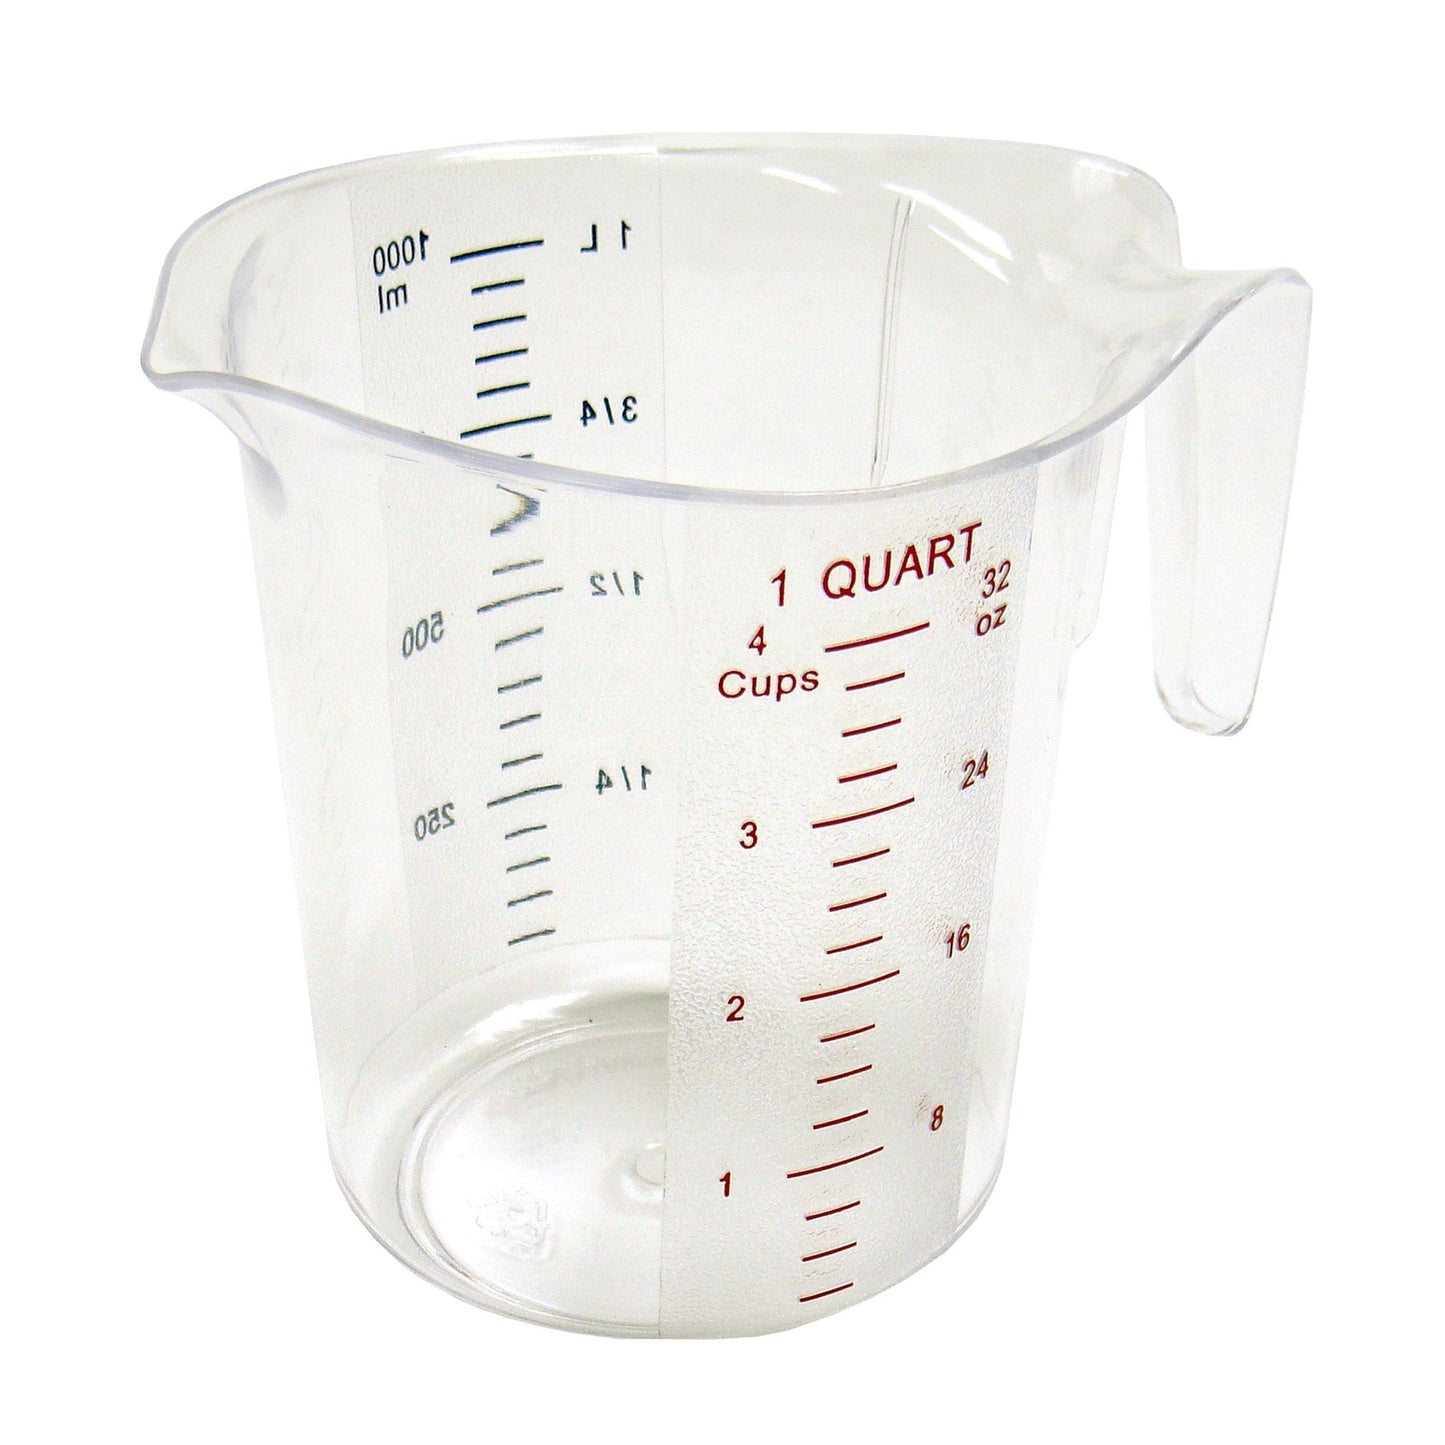 RW Base 1 Quart Measuring Jars, 10 Durable Measuring Beakers - Metric and Imperial Units, V-Shaped Spout, Clear Plastic Measuring Cups, Handle with Th